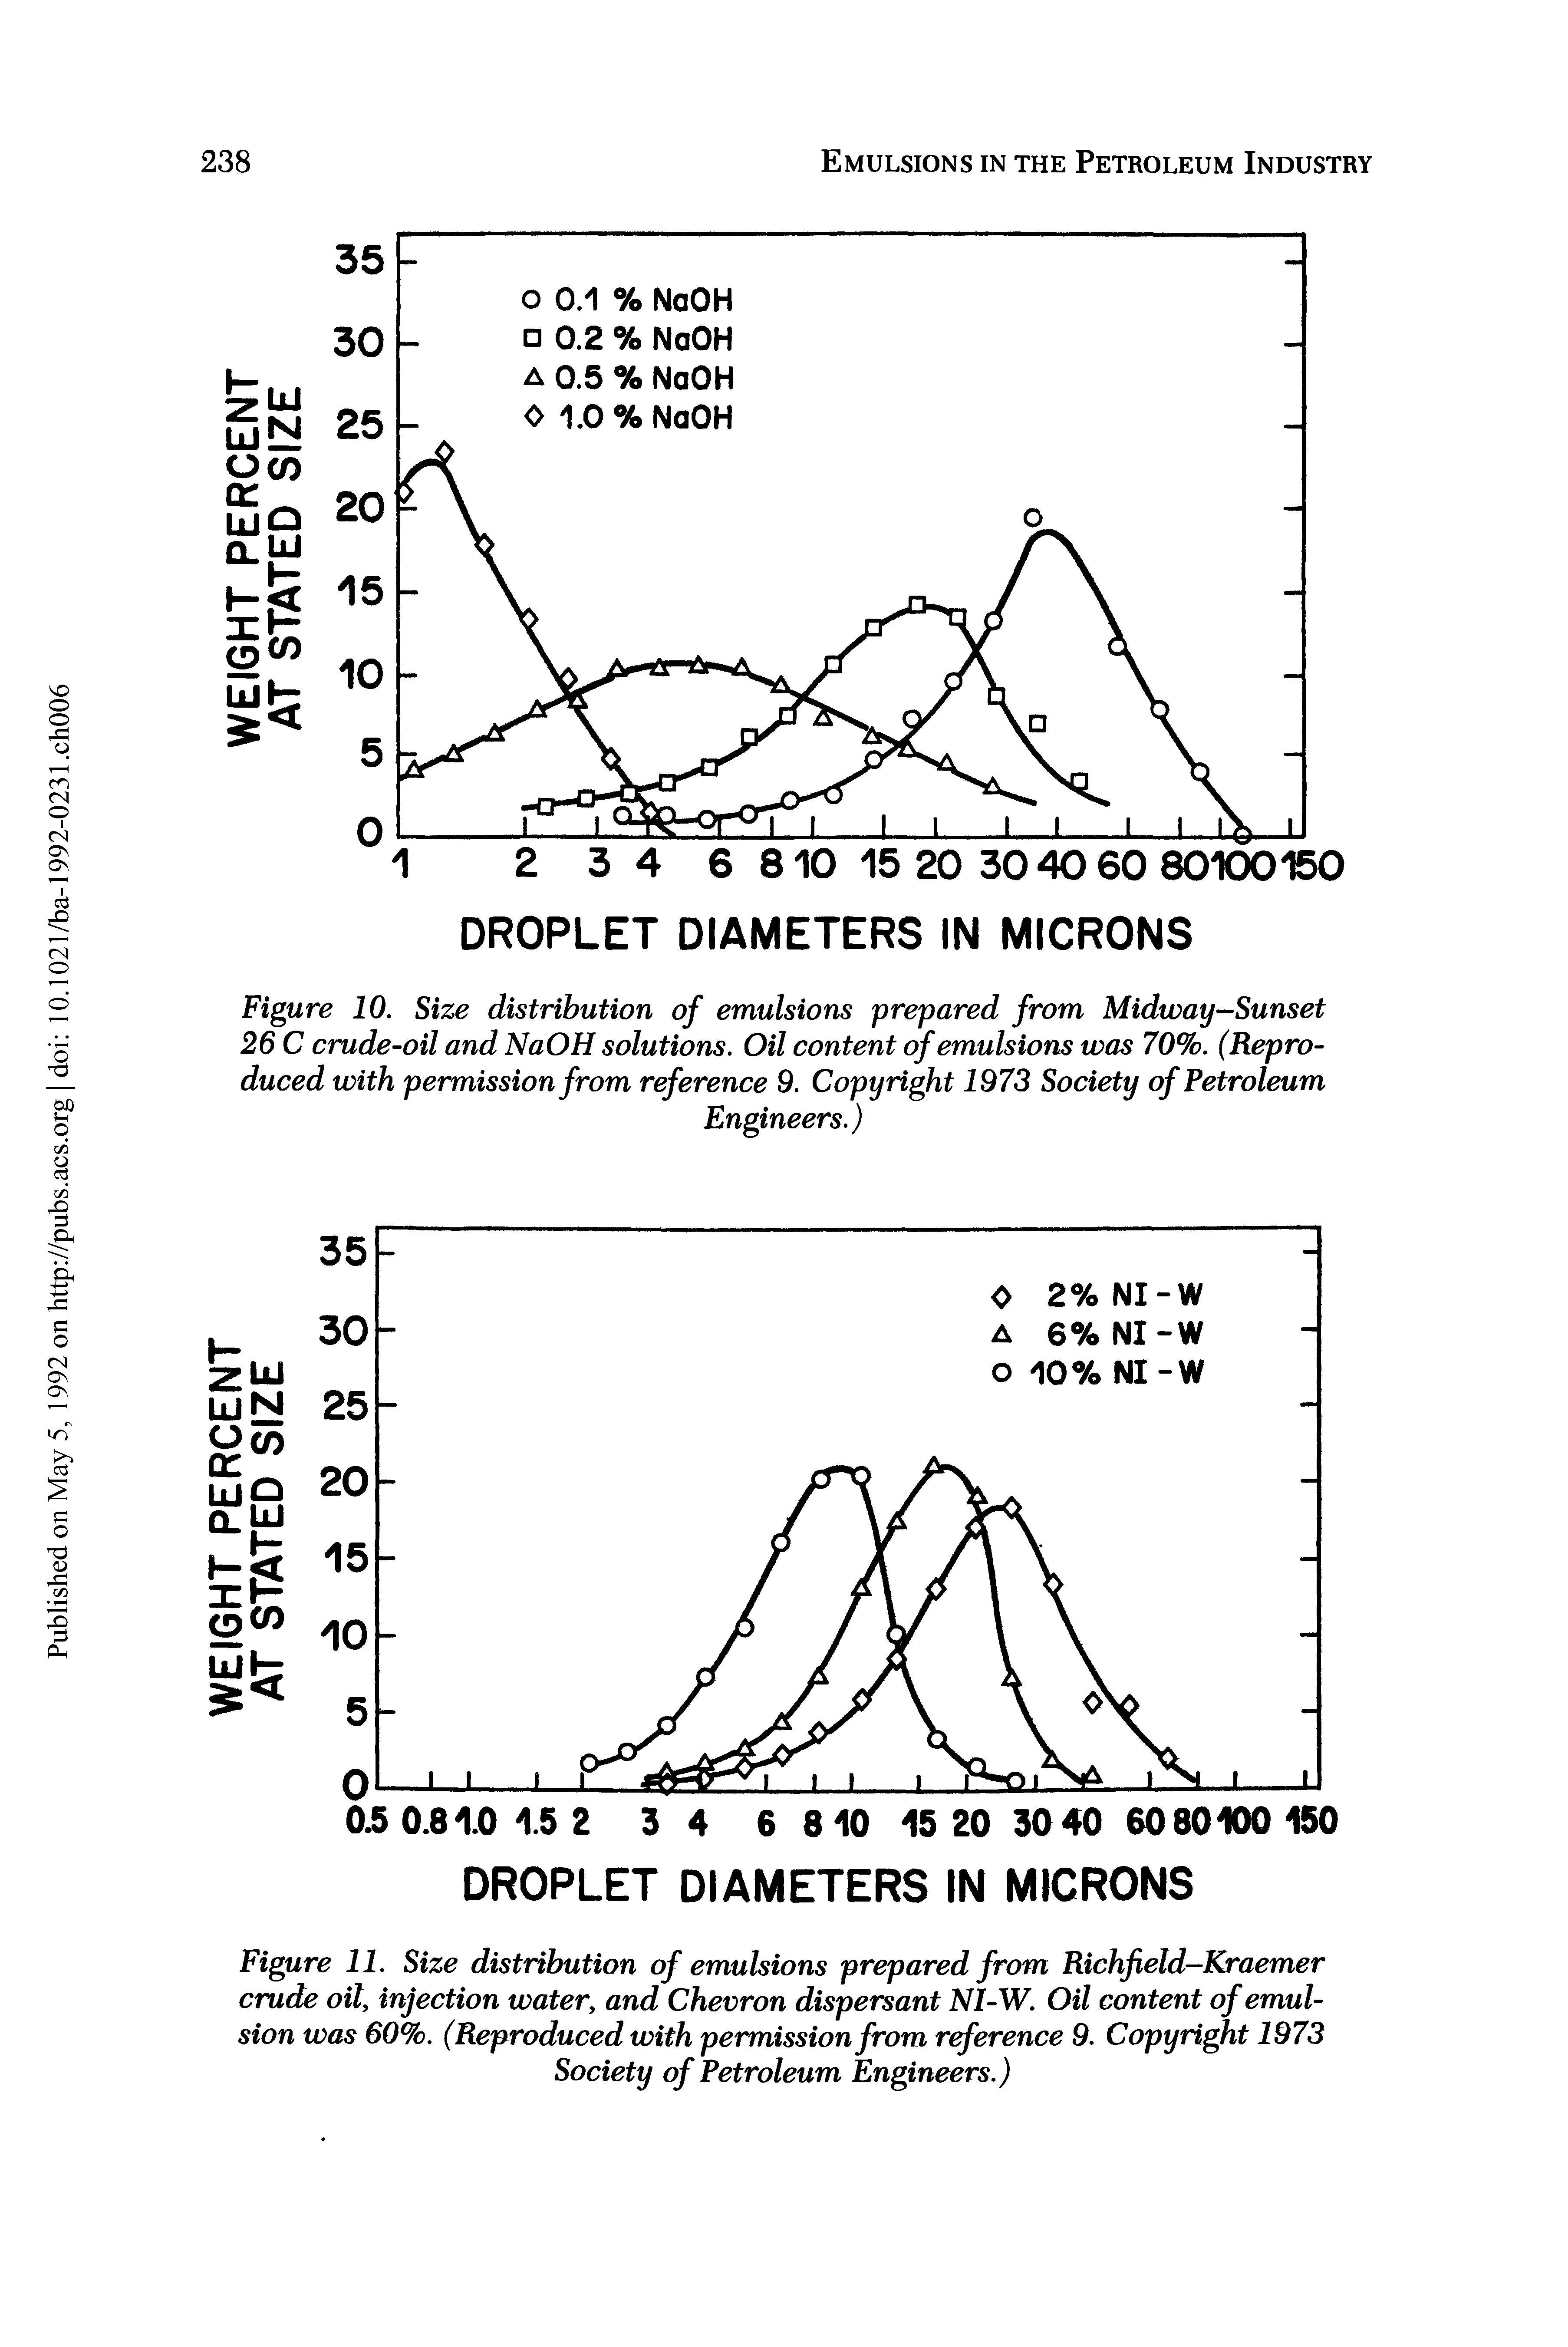 Figure 10. Size distribution of emulsions prepared from Midway-Sunset 26 C crude-oil and NaOH solutions. Oil content of emulsions was 70%. (Reproduced with permission from reference 9. Copyright 1973 Society of Petroleum...